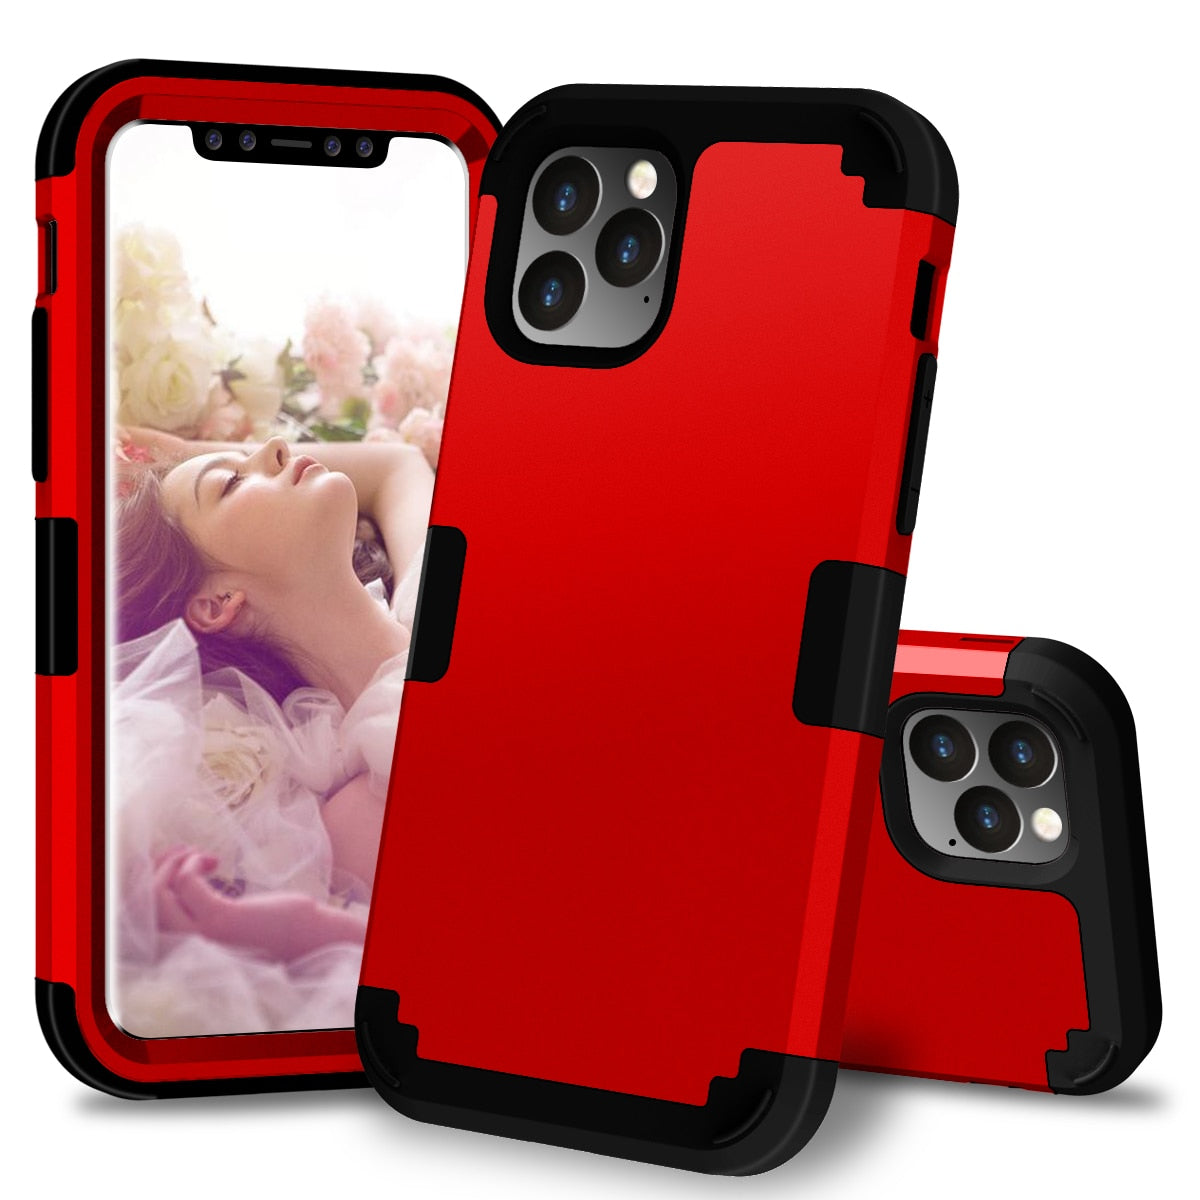 For Apple iPhone 11 2019 Case Shockproof Protect Hybrid Hard Rubber Impact Armor Phone Cases For iPhone 11 2019 Cover - 380230 for iPhone X XS / Red / United States Find Epic Store